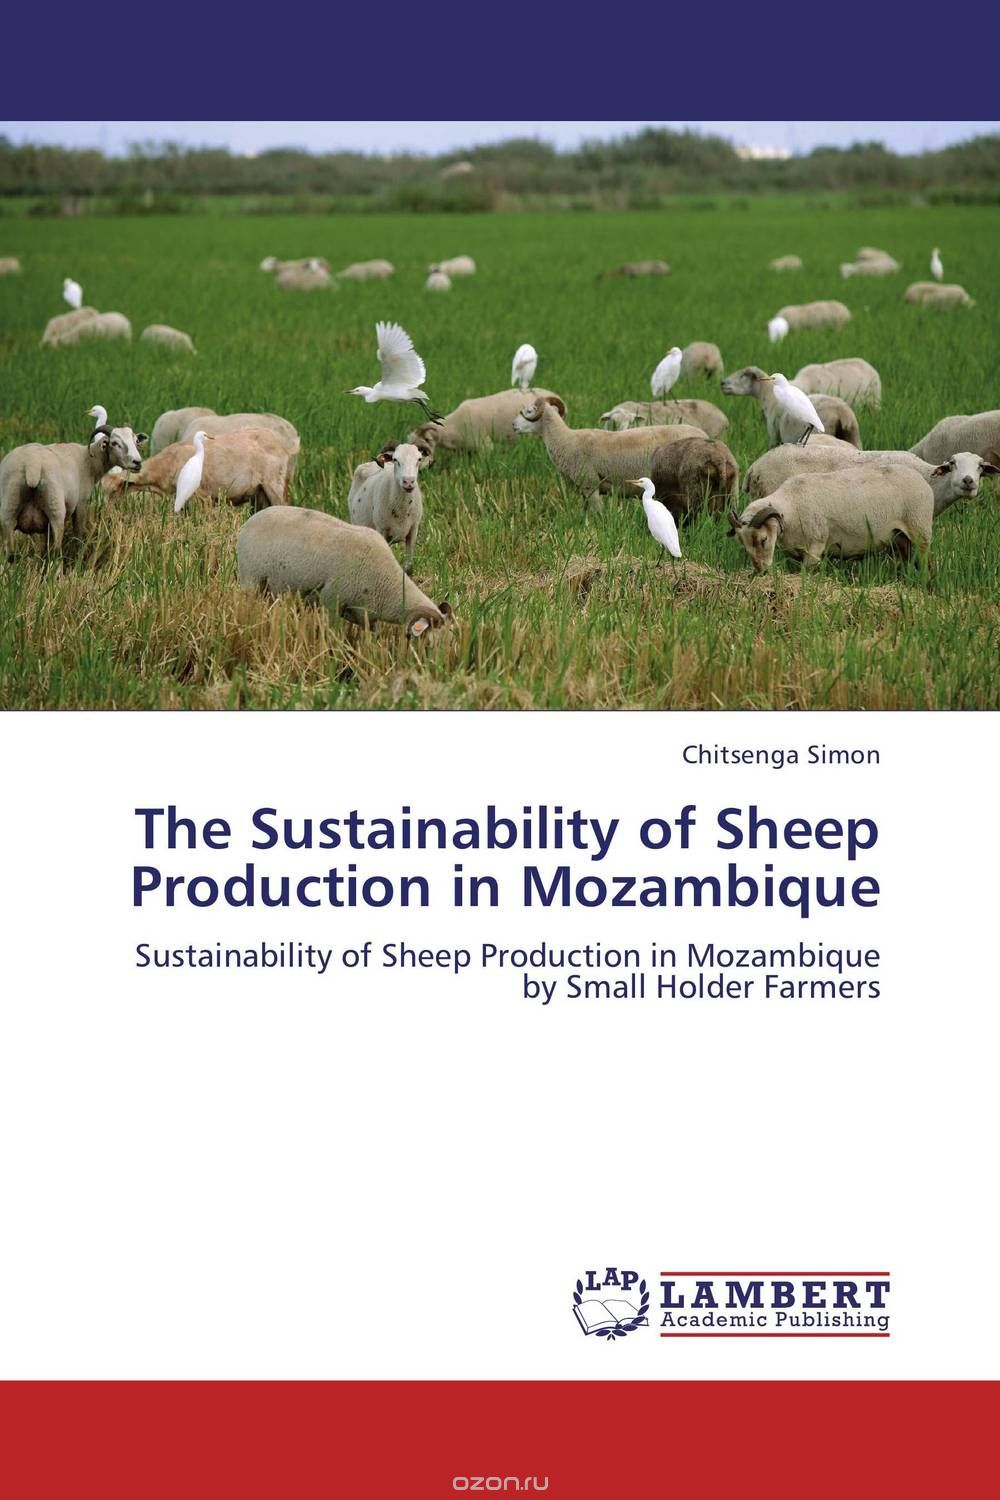 Скачать книгу "The Sustainability of Sheep Production in Mozambique"